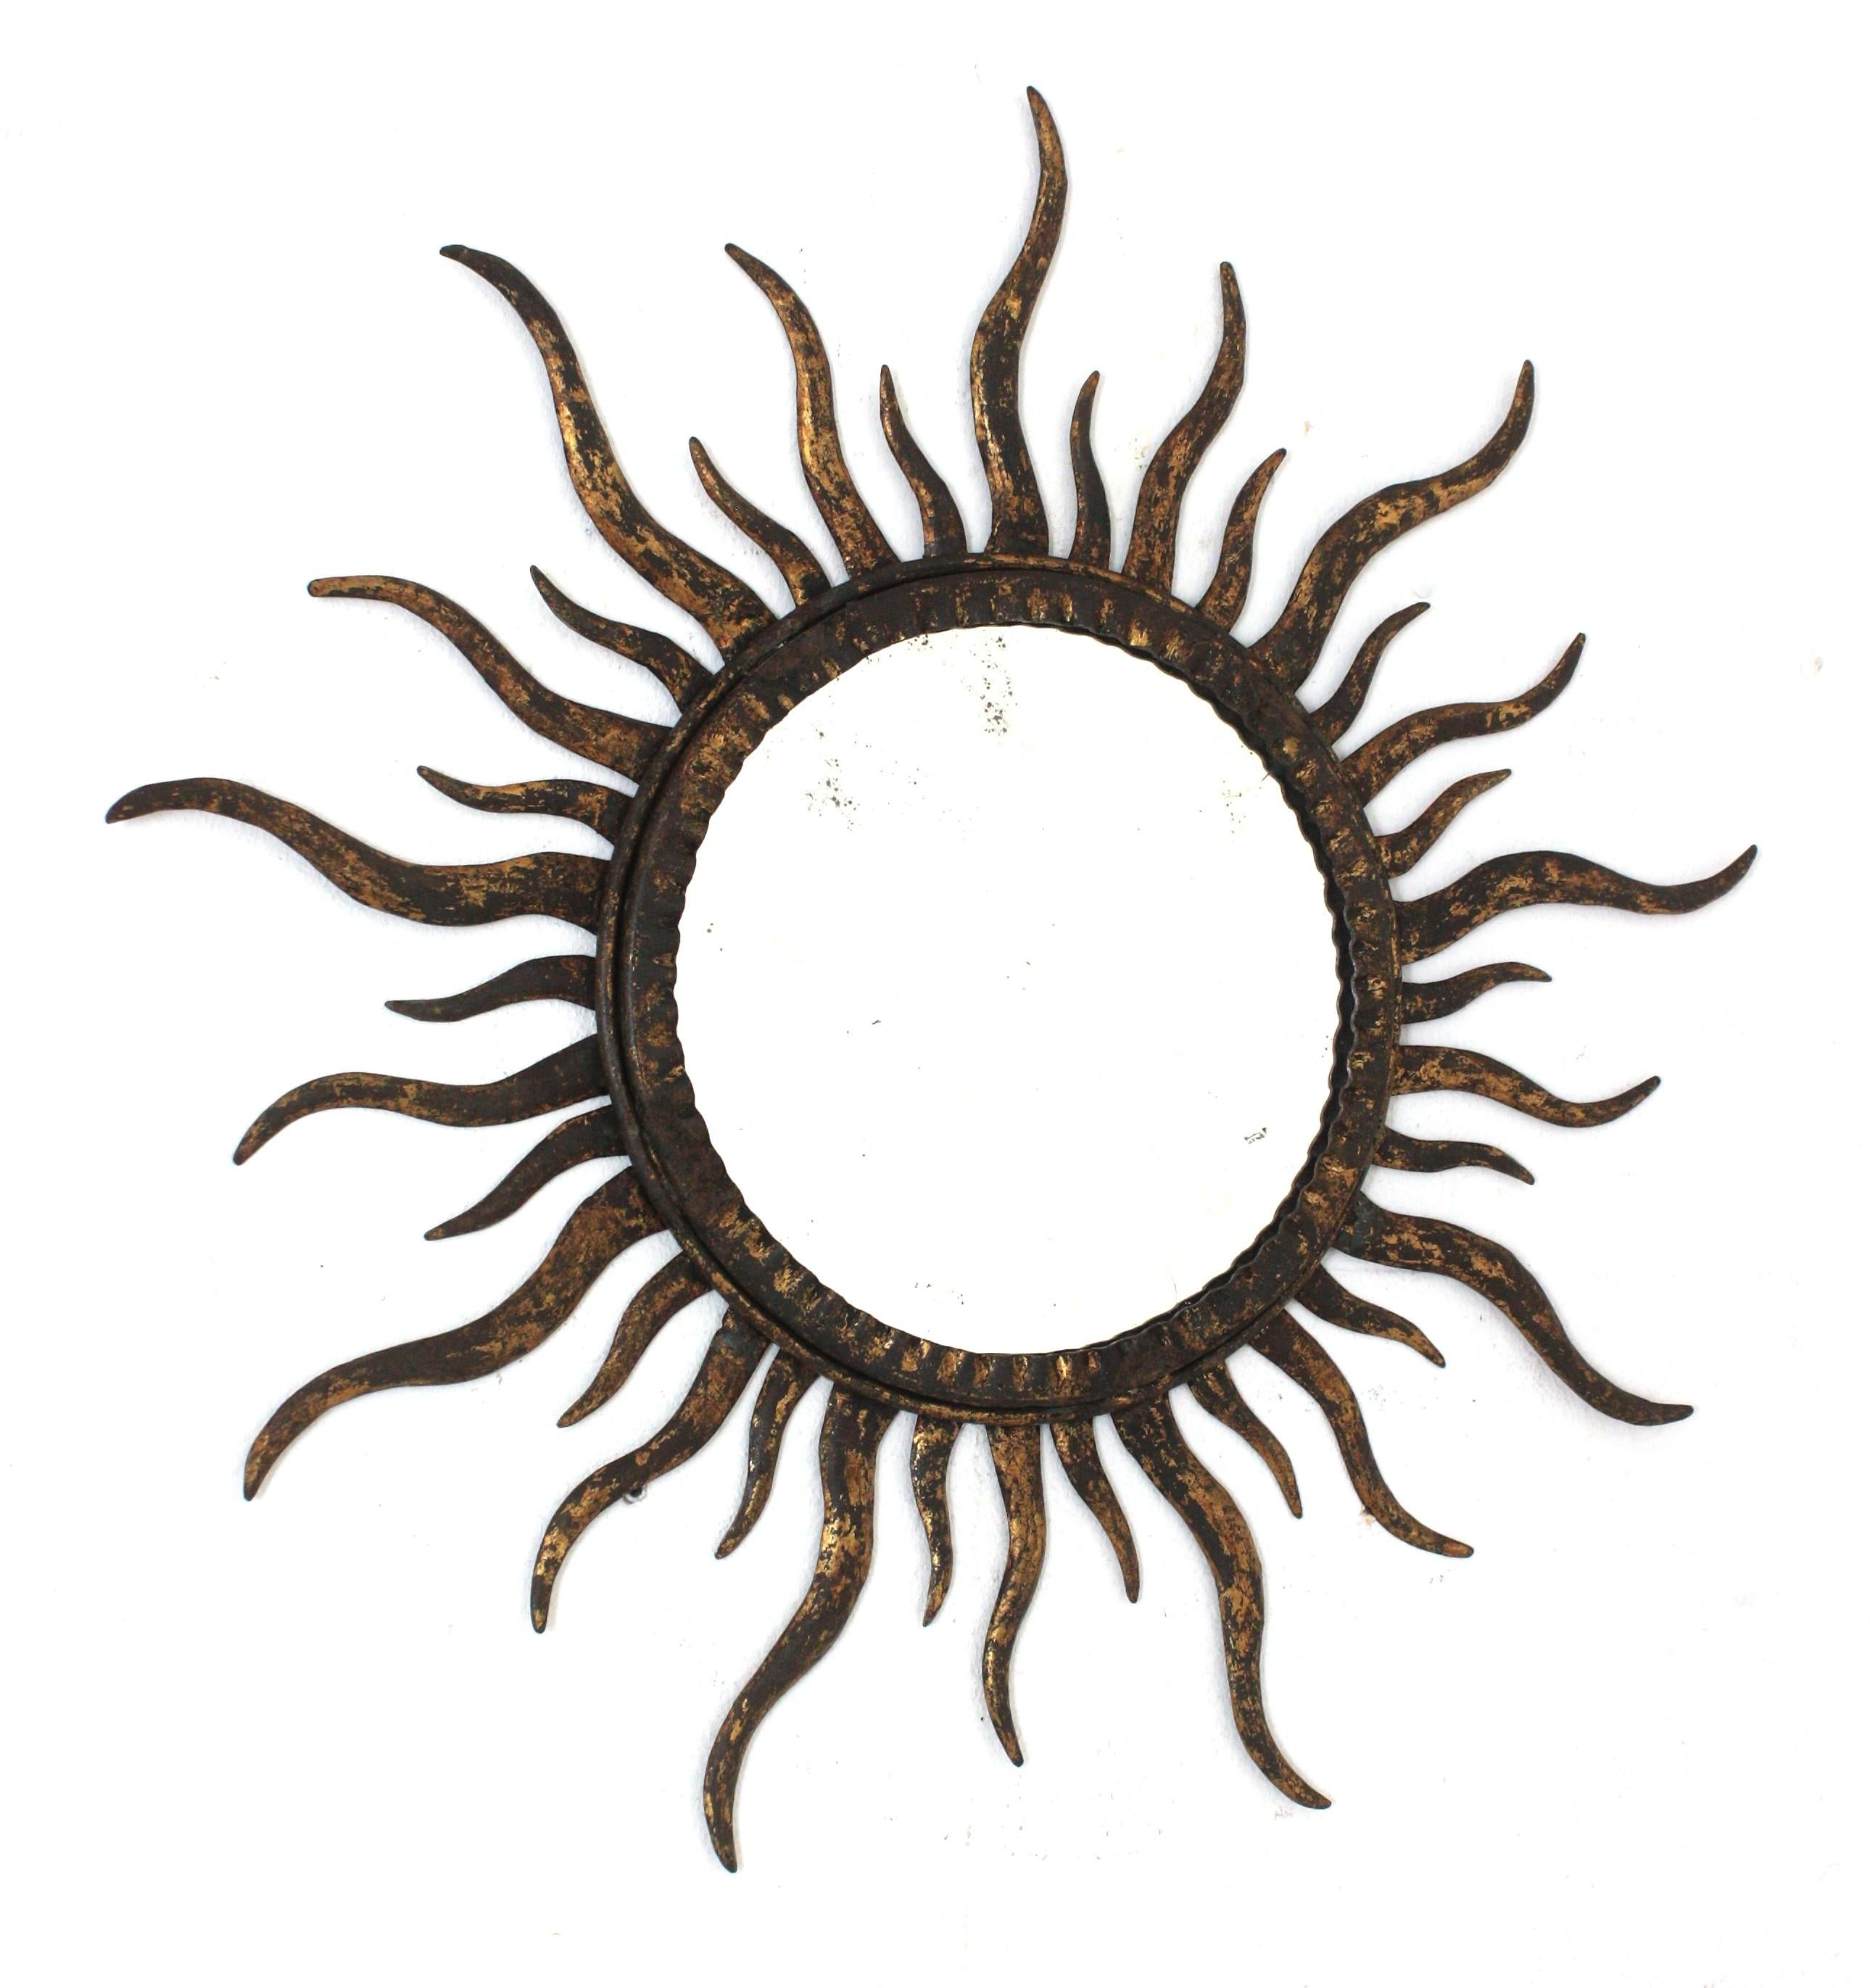 Sunburst mirror in the manner of Gilbert Poillerat, Parcel-Gilt Wrought Iron. France, 1940s.
This wall mirror has an eye-catching sunburst design with alternating rays in two sizes. Entirely made by hand in iron. Terrific aged patina and original